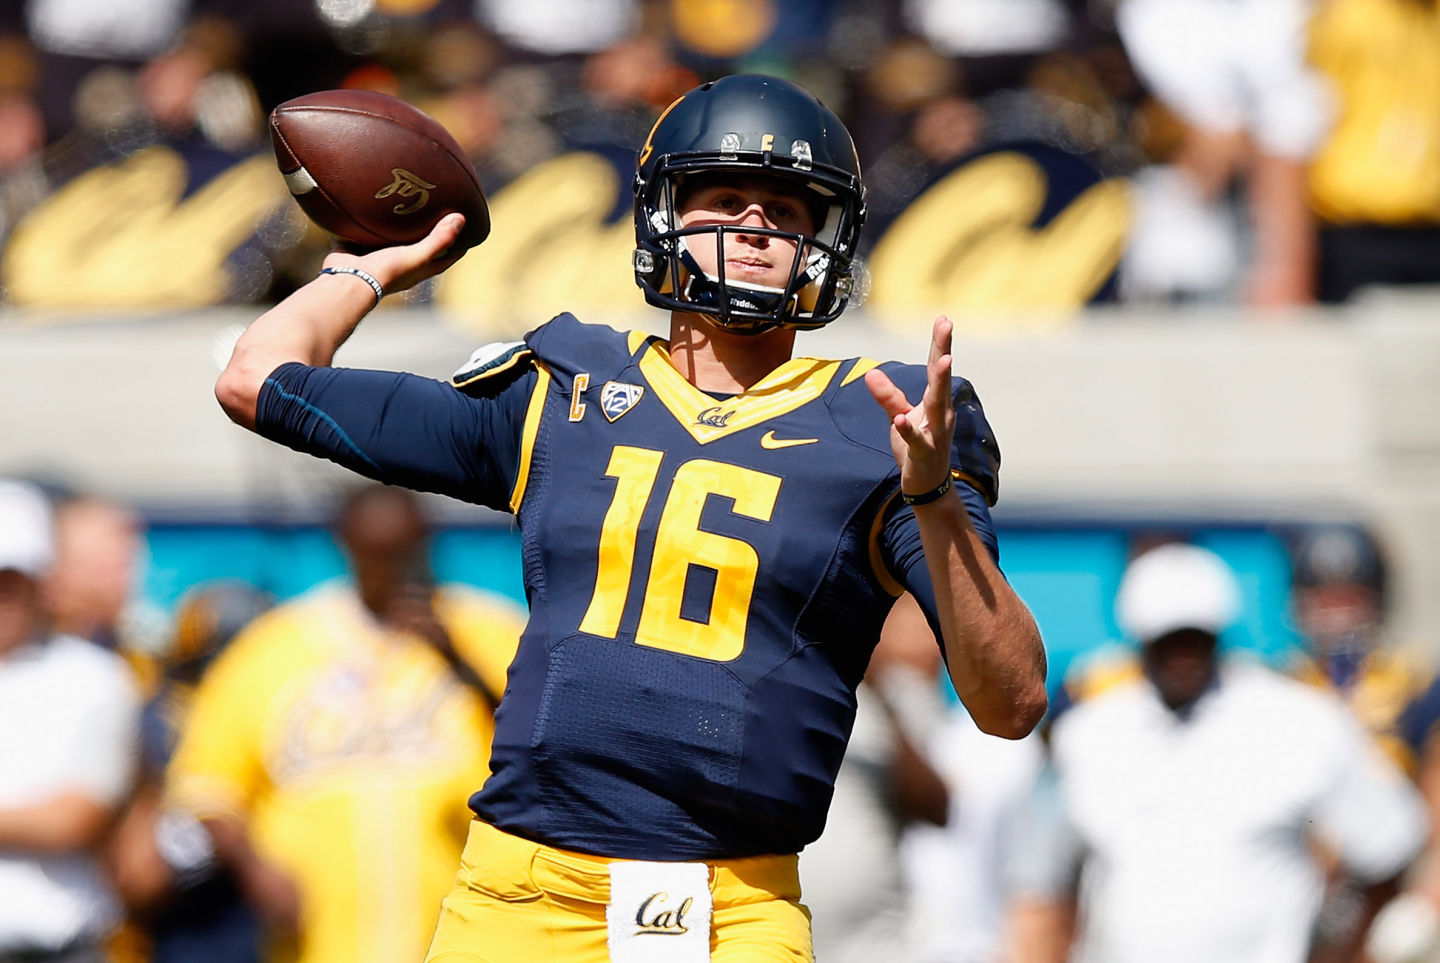 Jared Goff of the California Golden Bears in action against the Grambling State Tigers at California Memorial Stadium on Sept. 5, 2015.  Ezra Shaw/Getty Images